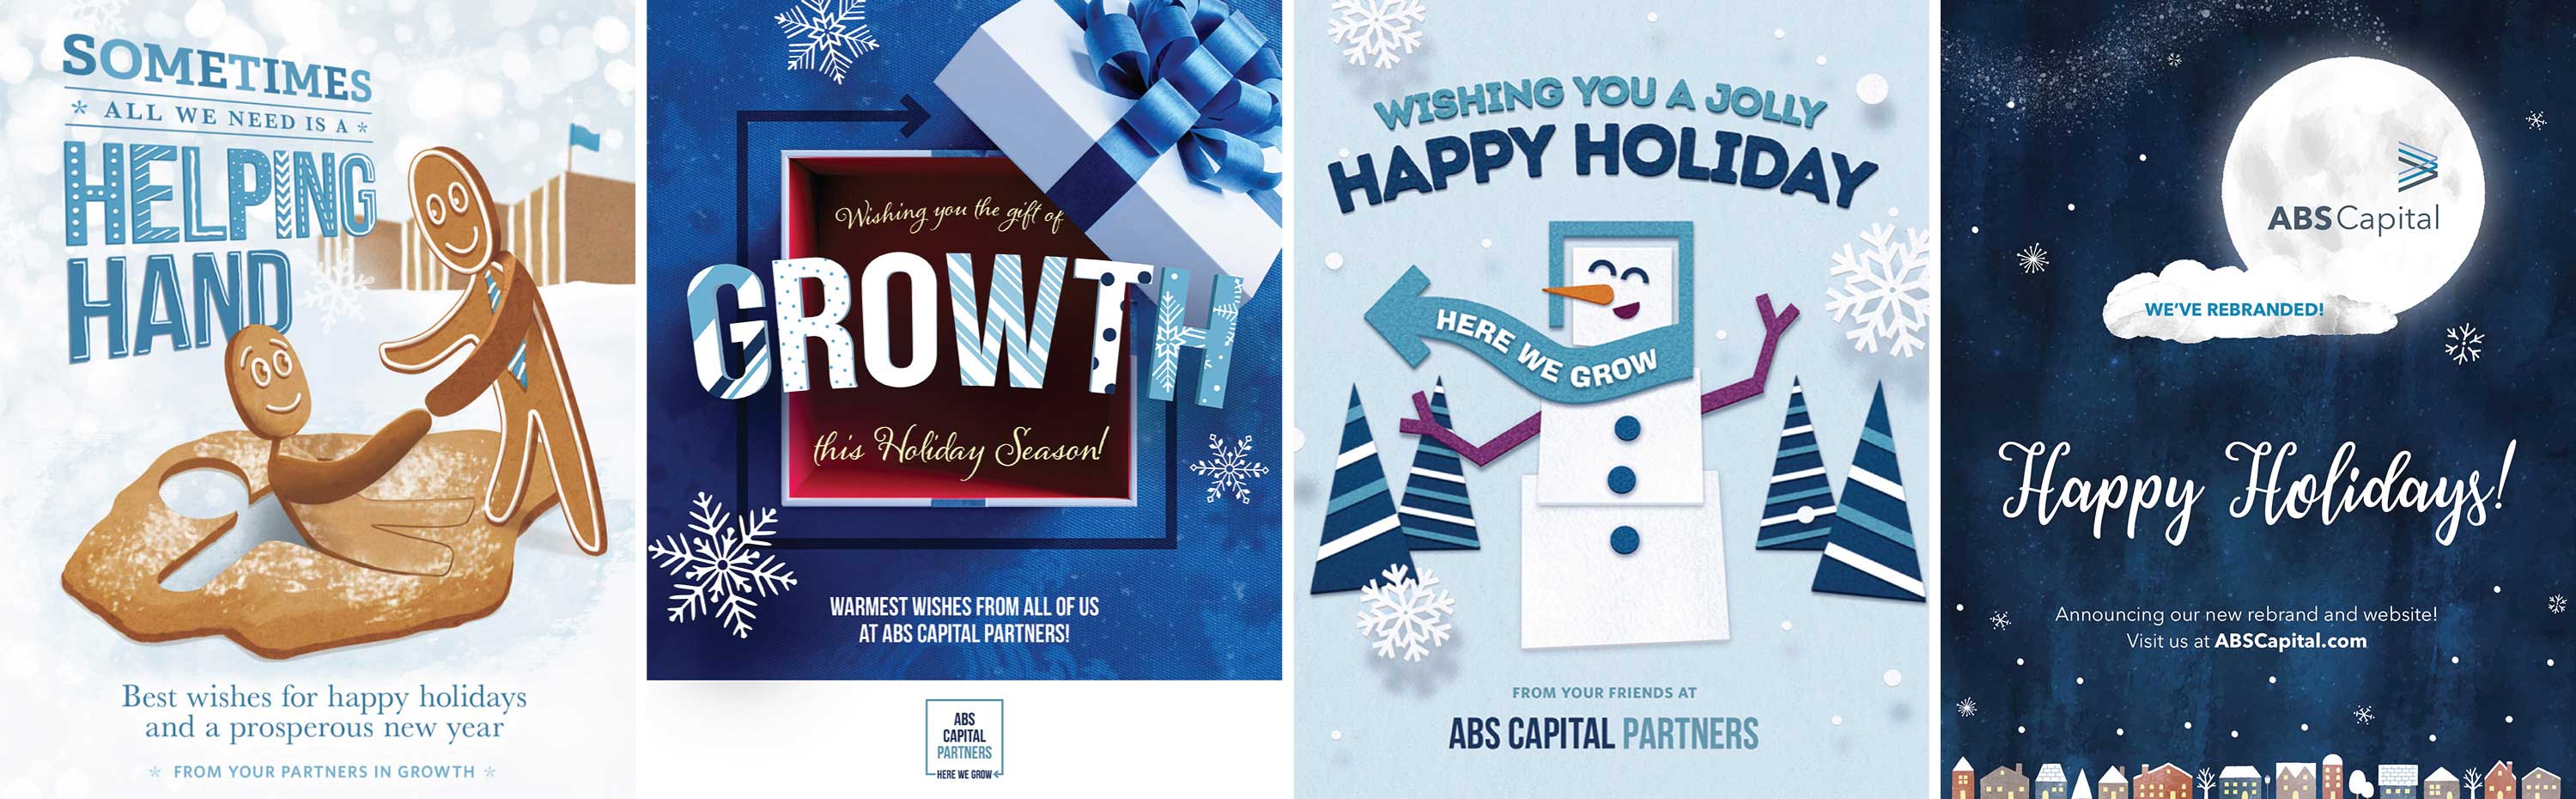 ABS Capital holiday cards